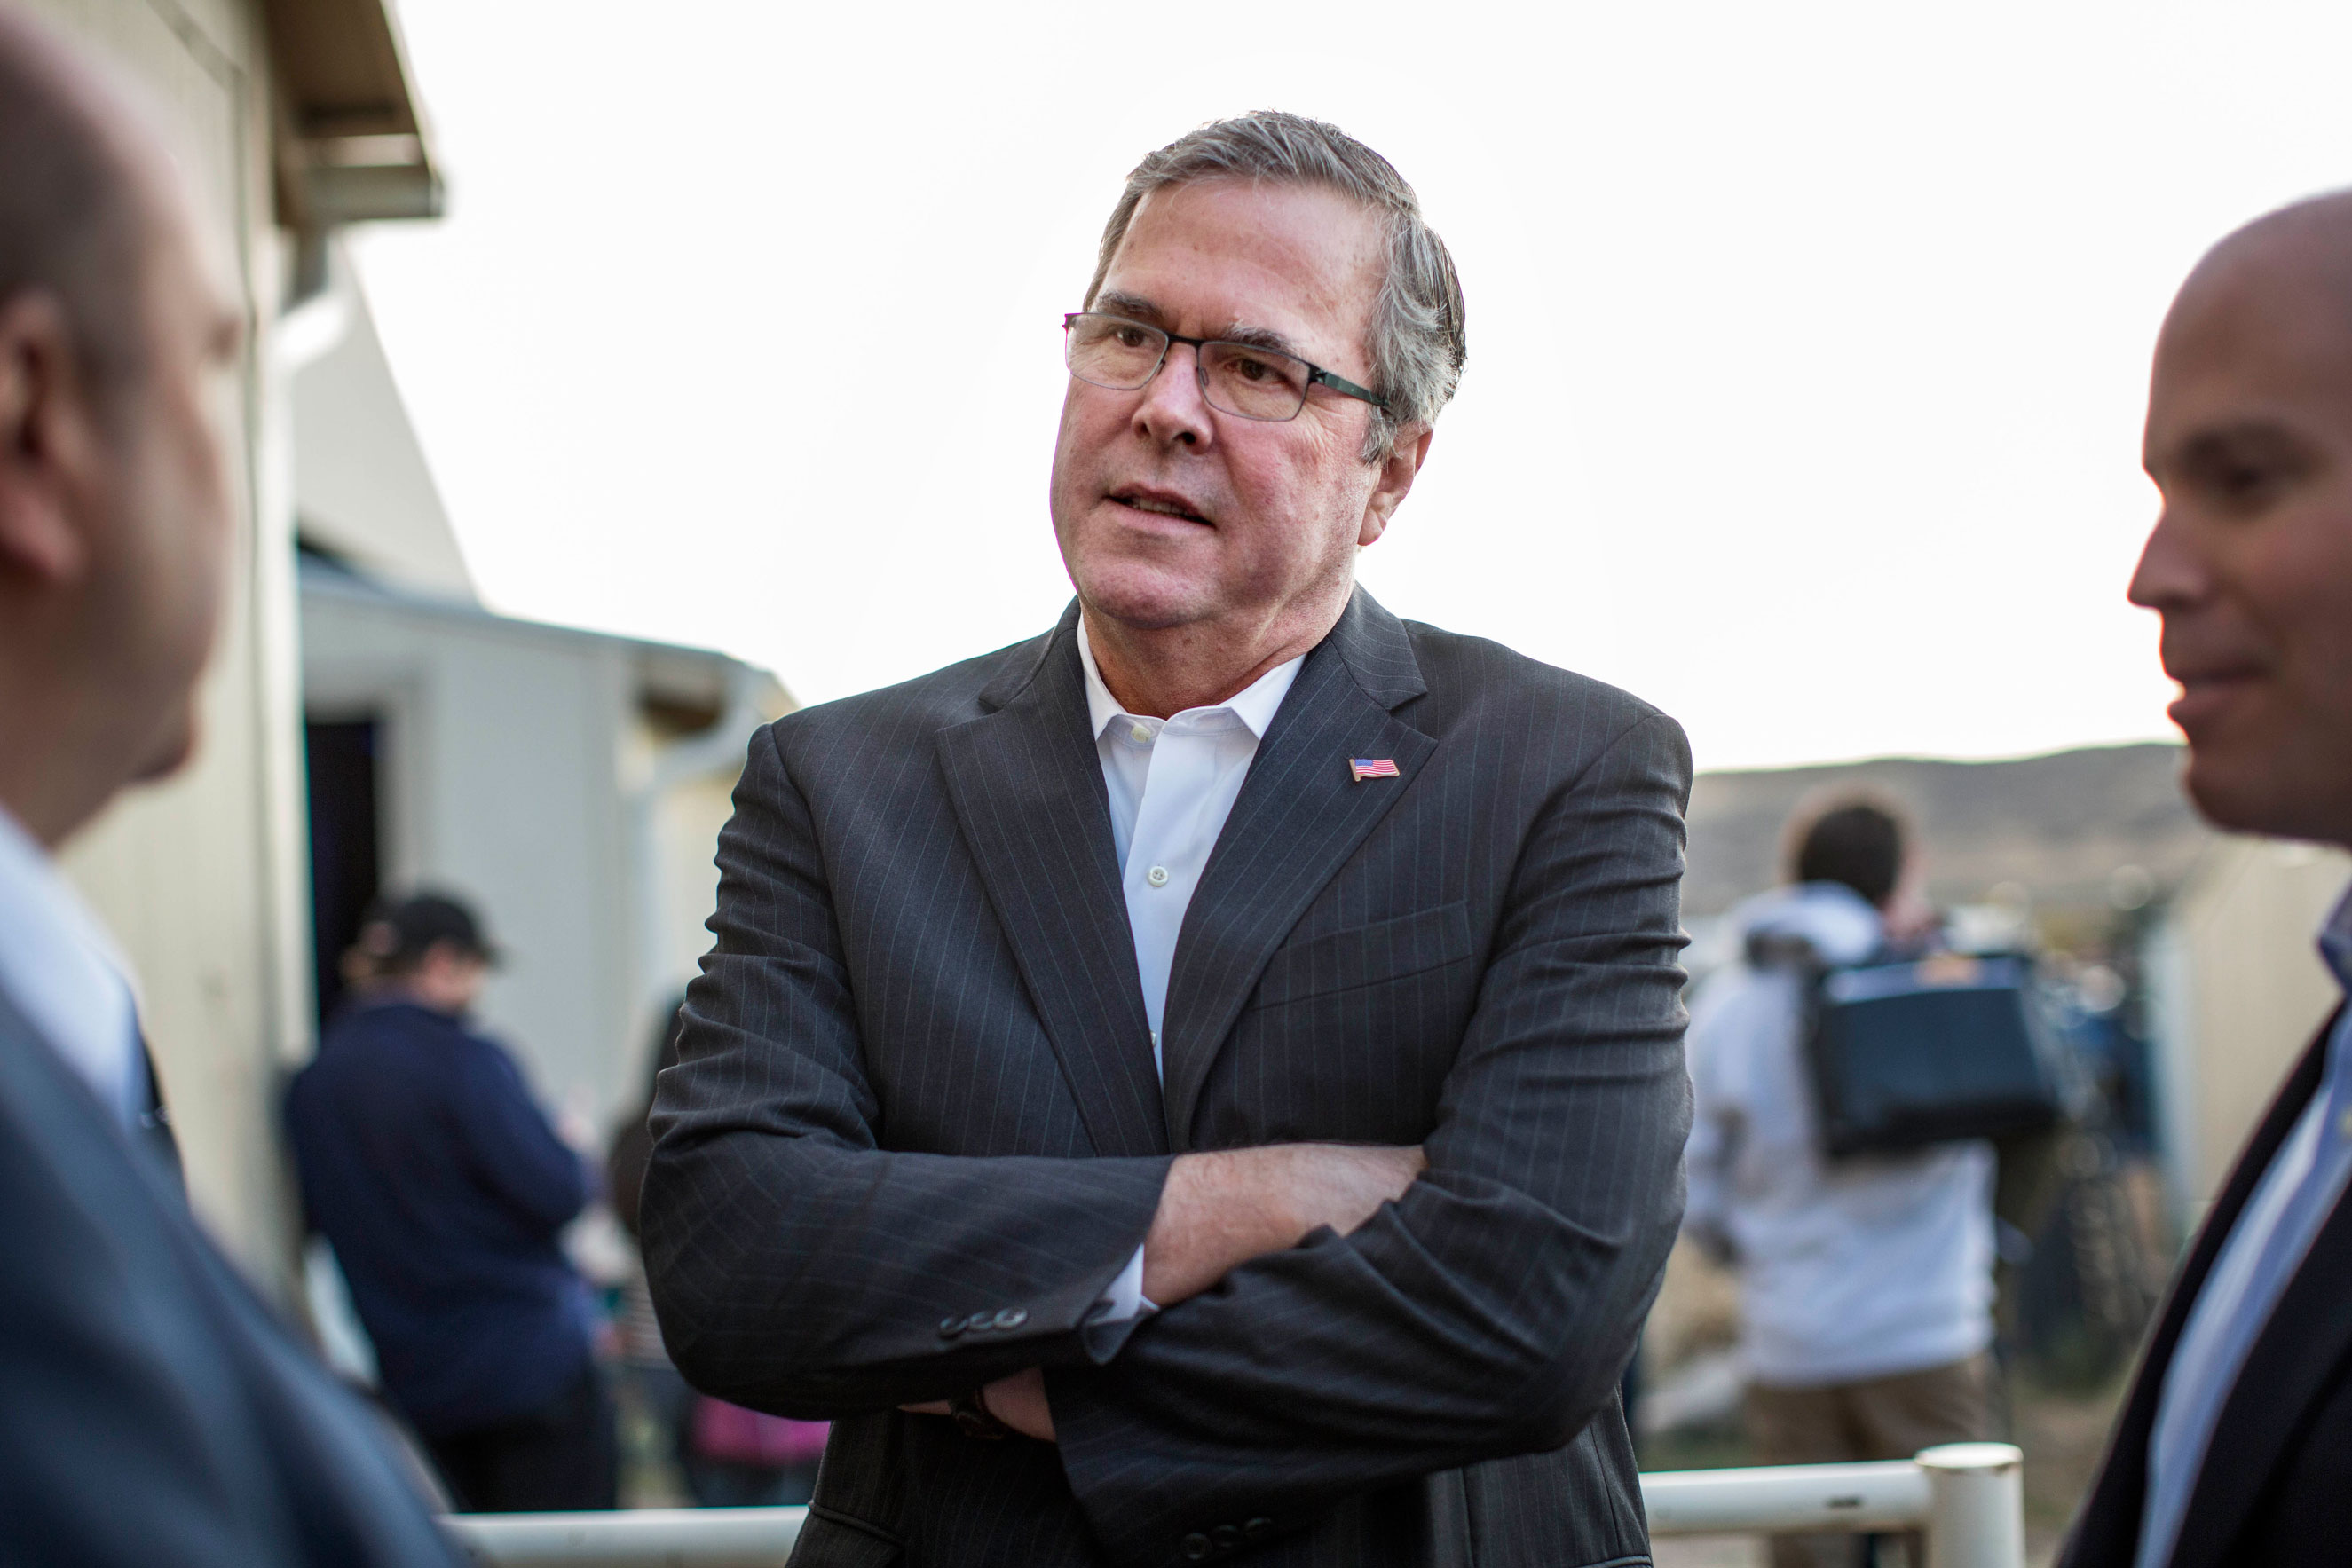 Jeb Bush at the Douglas County Fairgrounds in Castle Rock, Colo., on Oct. 29, 2014.